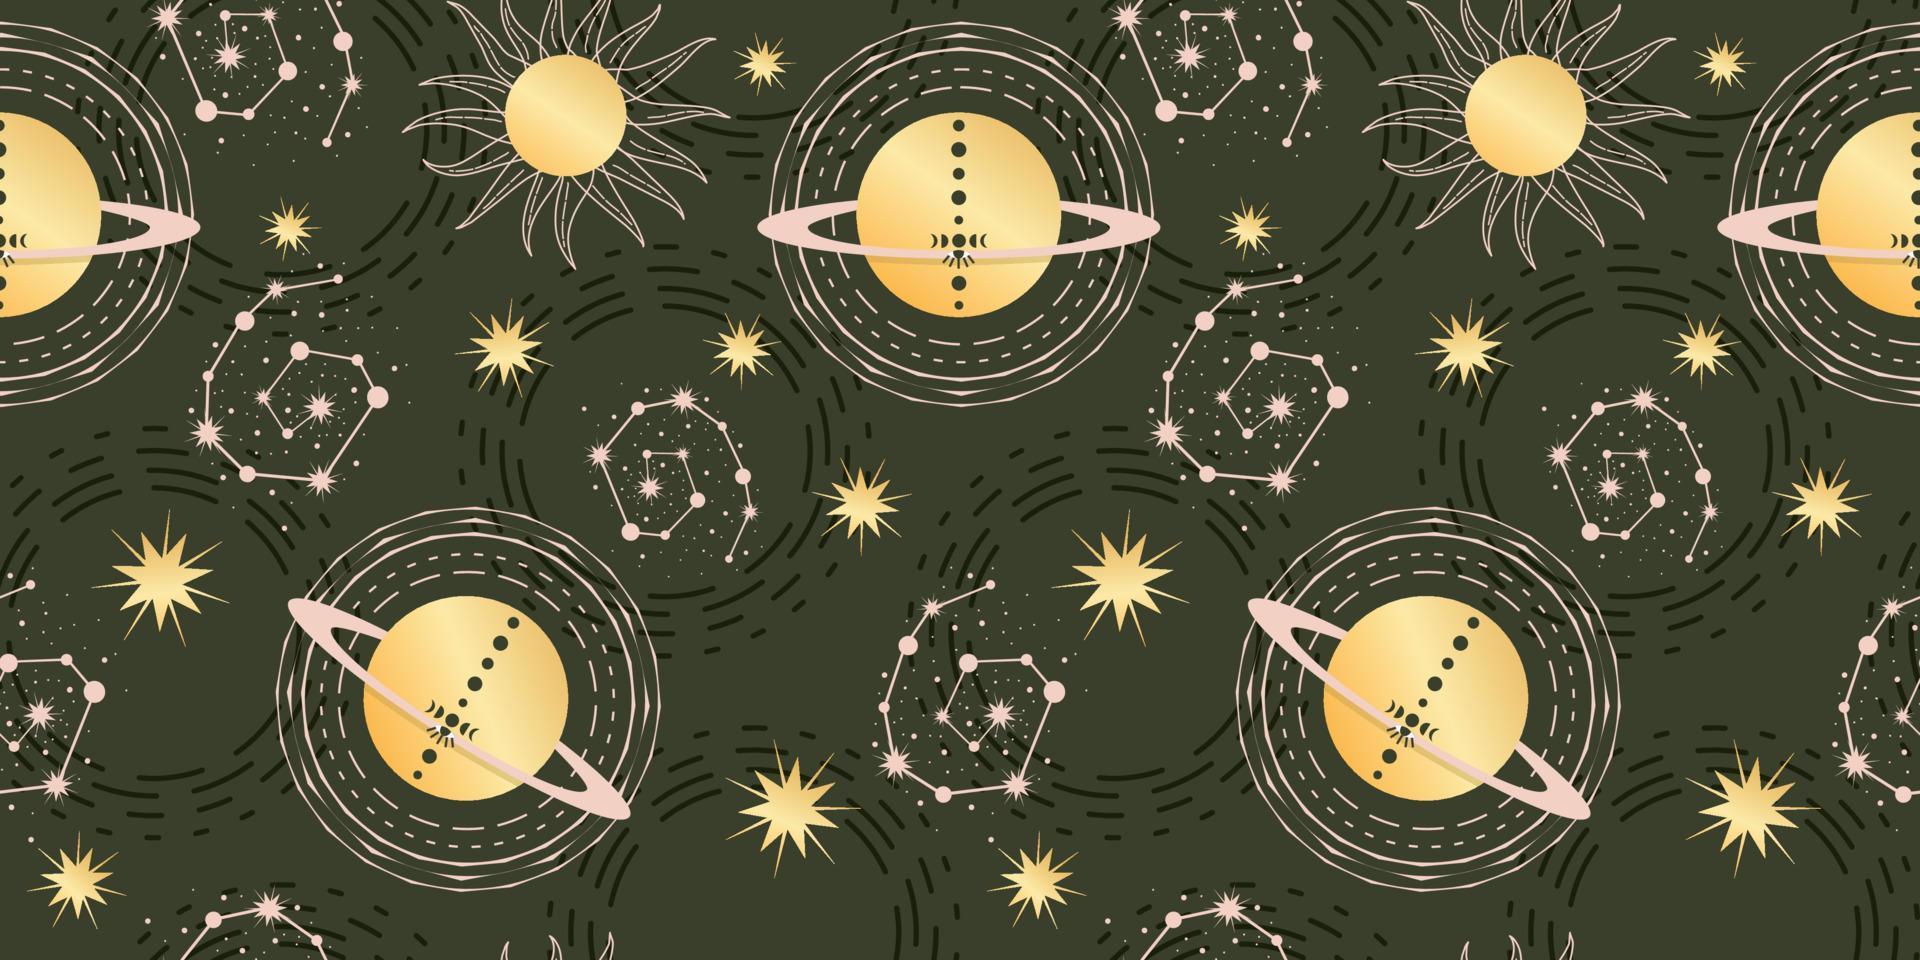 Star celestial seamless pattern with planet and constellations. Magical astrology in vintage boho style. Golden sun with moon phases and stars. Vector illustration